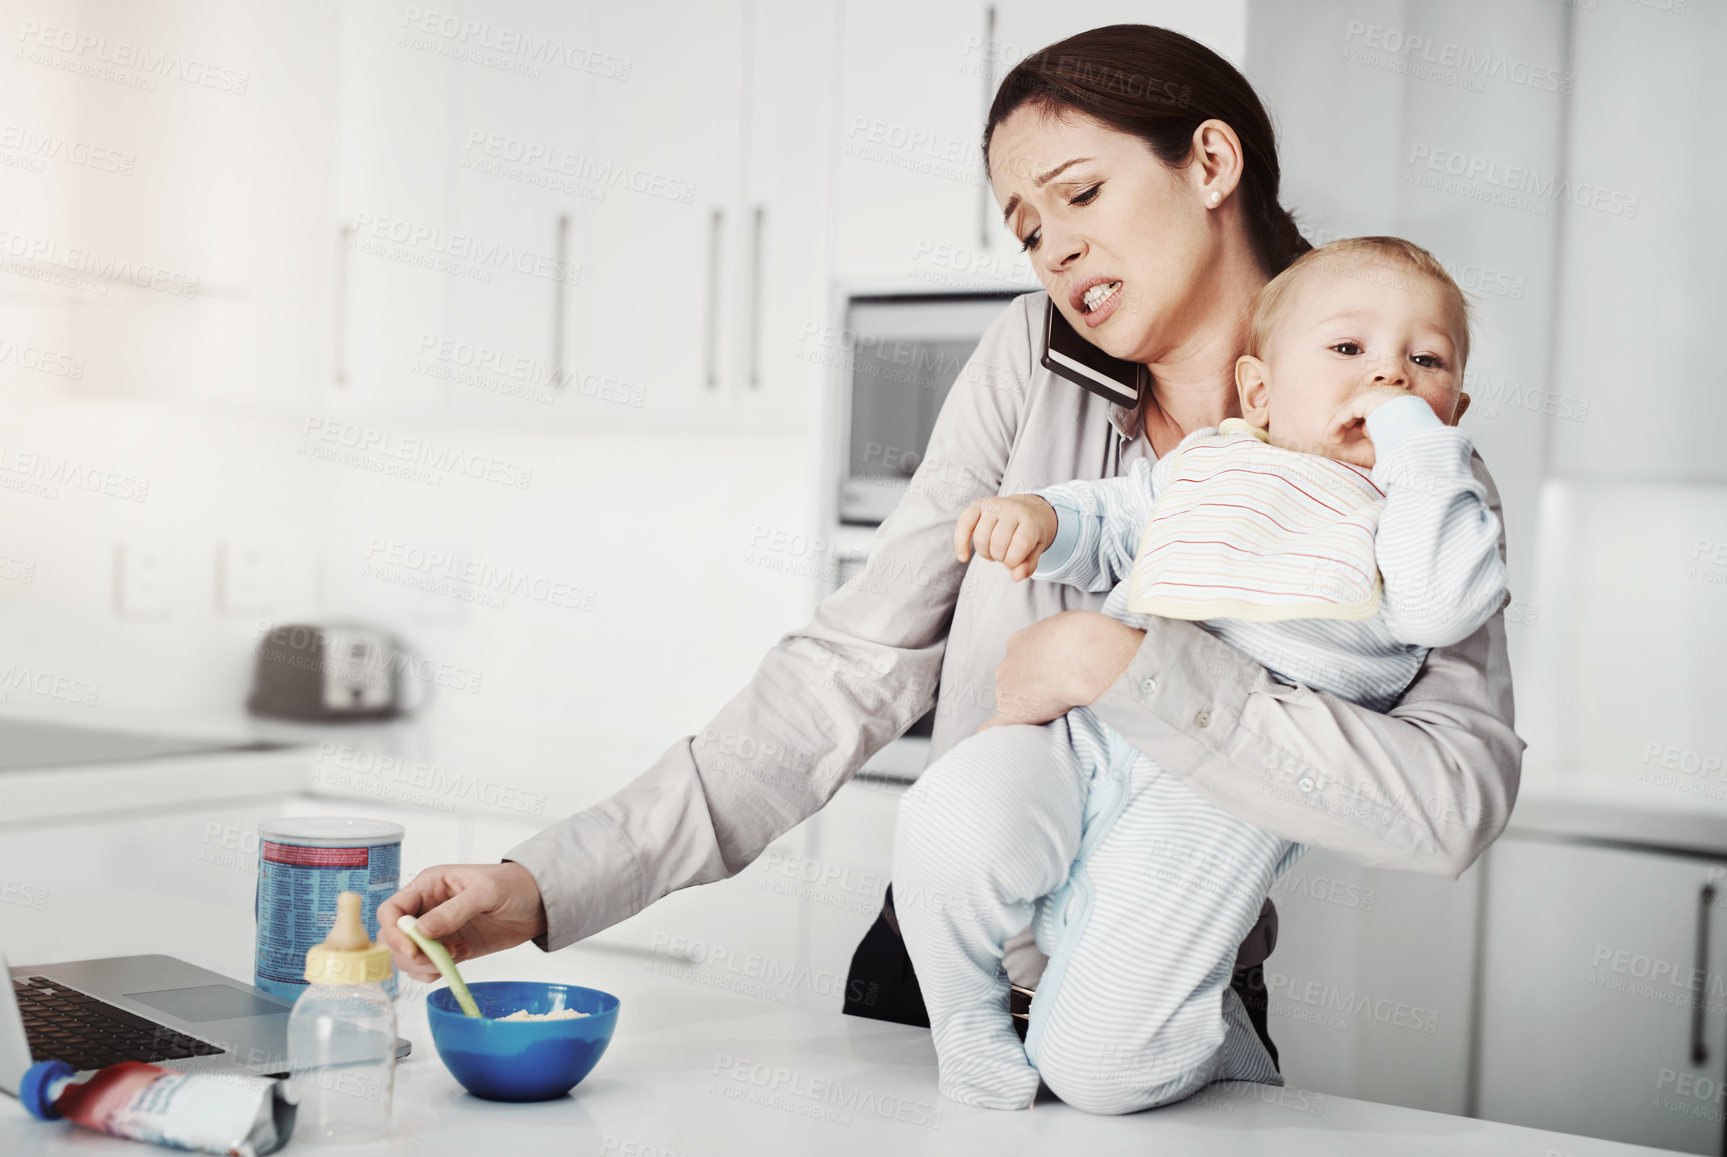 Buy stock photo Frustrated, baby and mother busy multitasking in home with phone, food and work or childcare, stress and pressure. Mom, newborn boy and overwhelmed with no support, partner or working single parent 